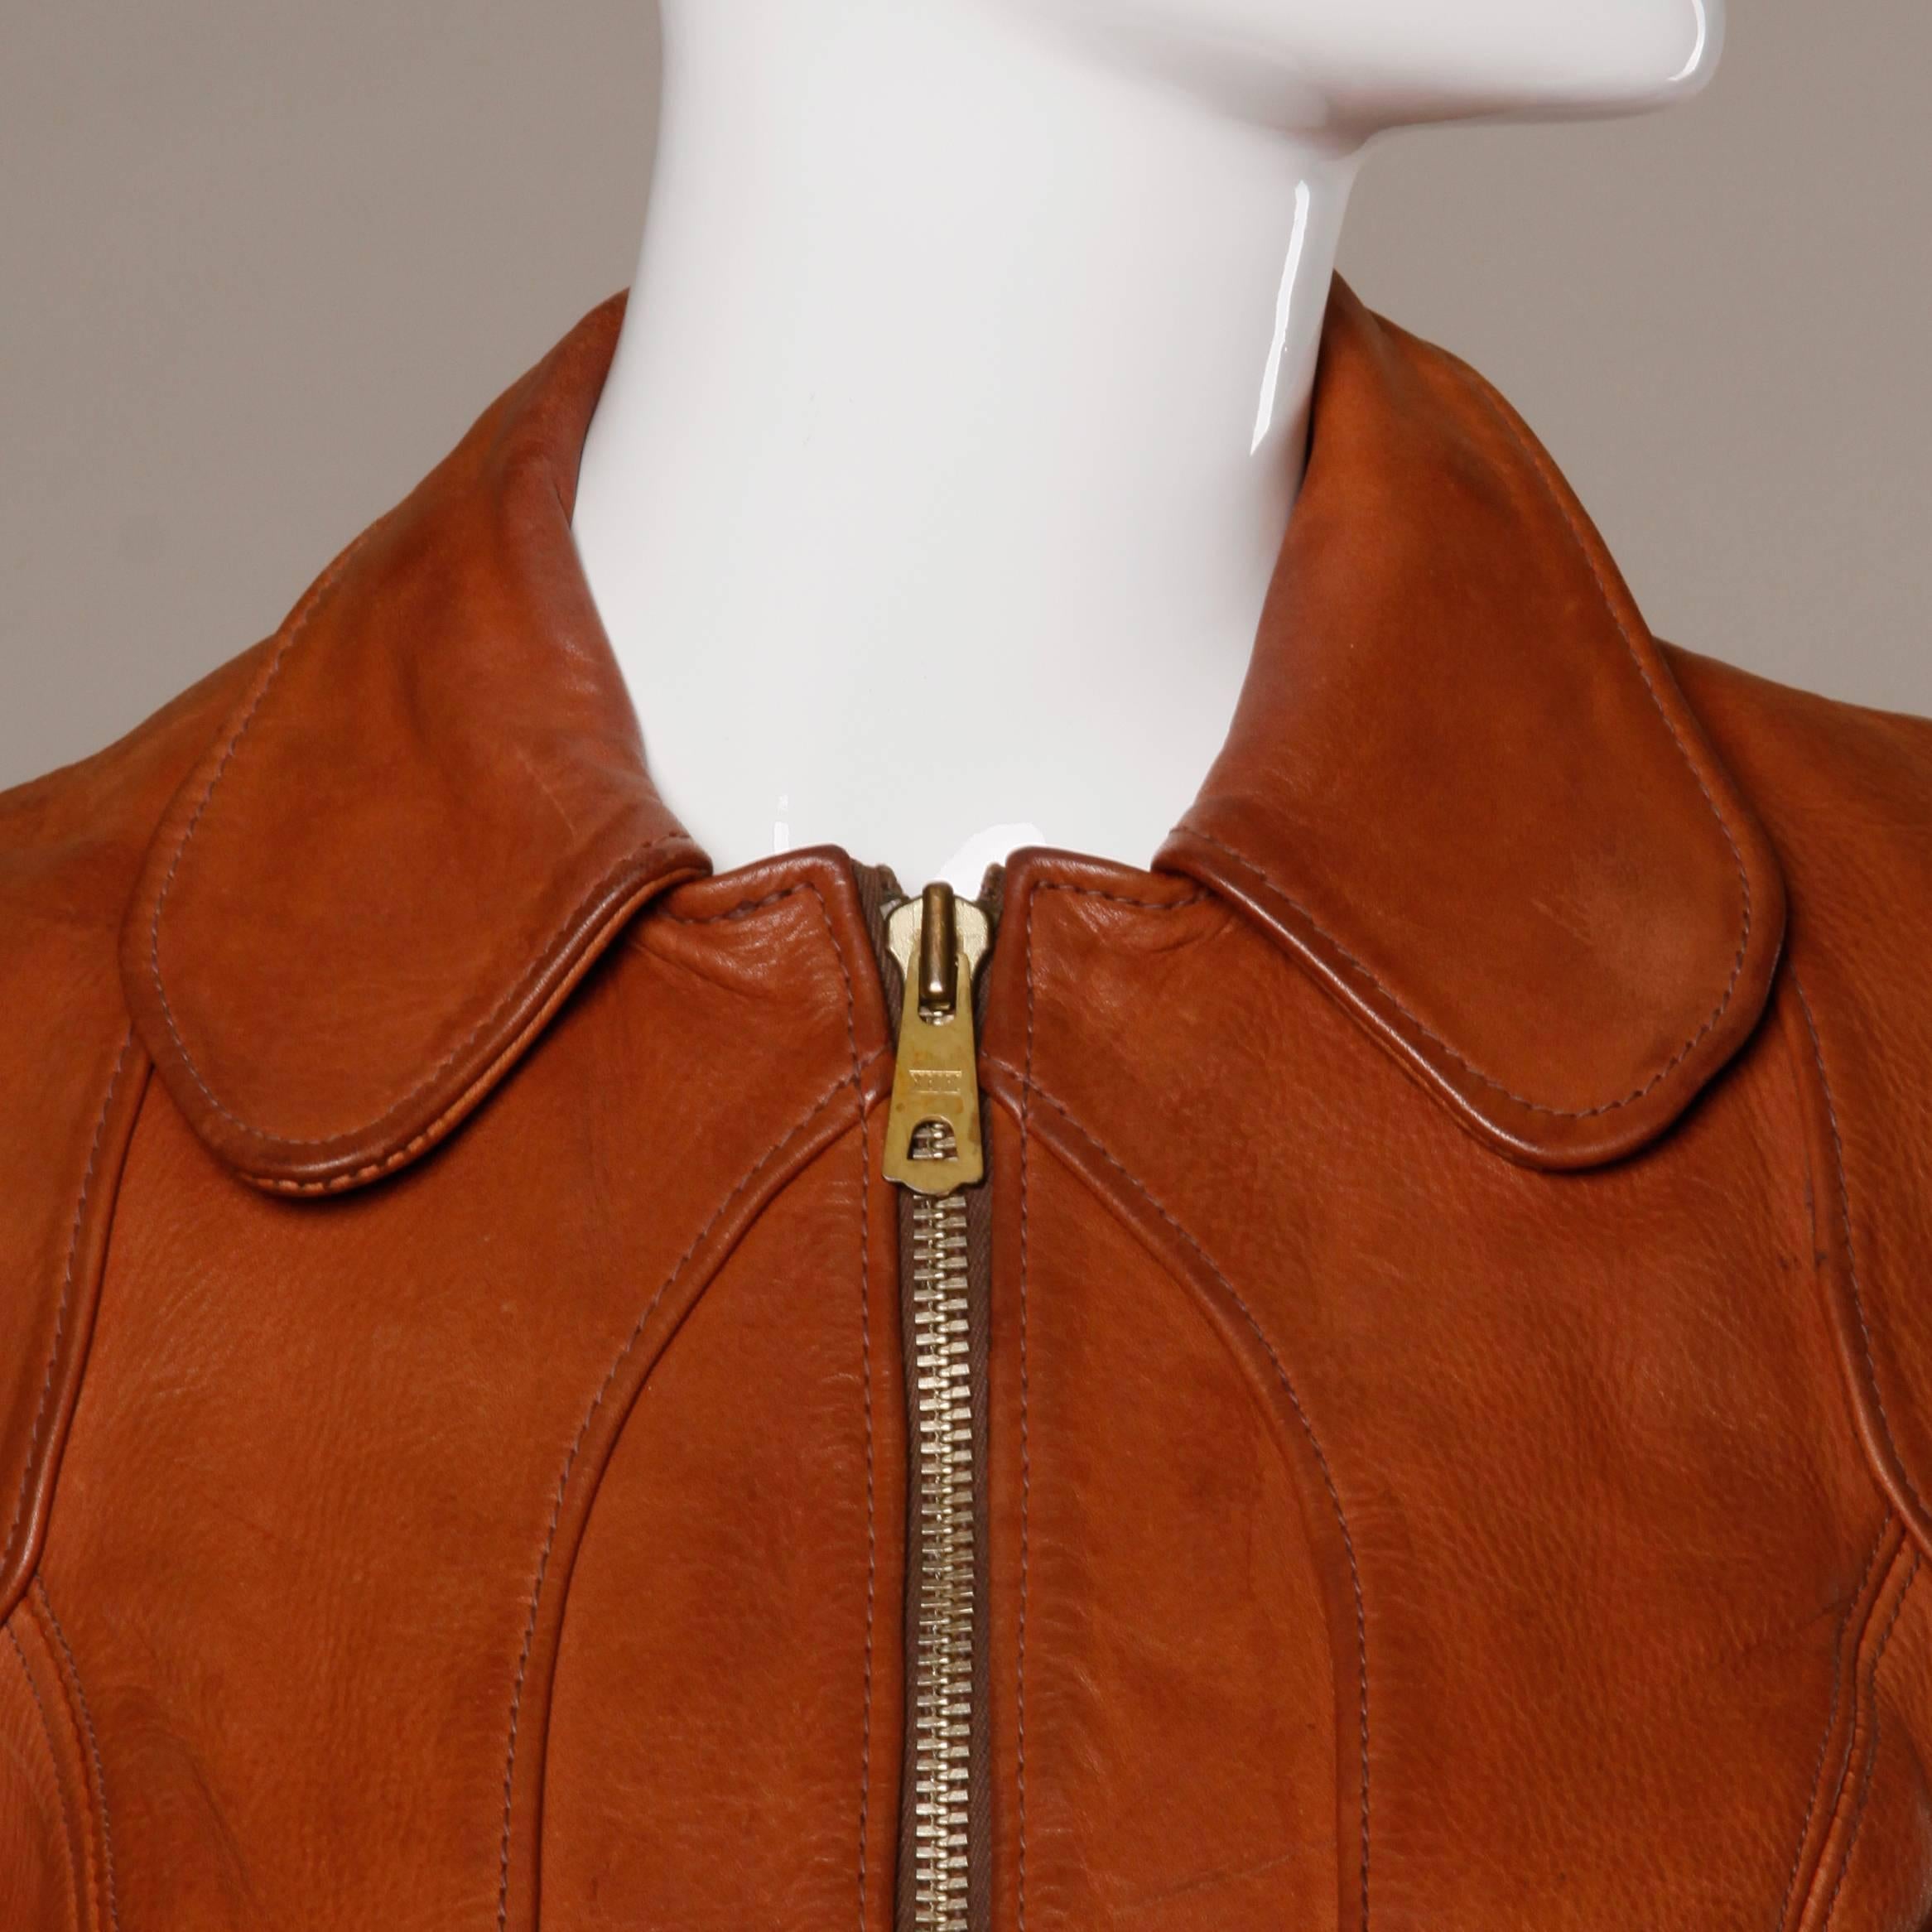 Extremely rare East West Musical Instruments vintage 1970s hand crafted leather fitted jacket. Tiny fit and supple worn in leather with an excellent patina and plenty of wear left in them. Rounded collar and heavy metal zipper. The condition is